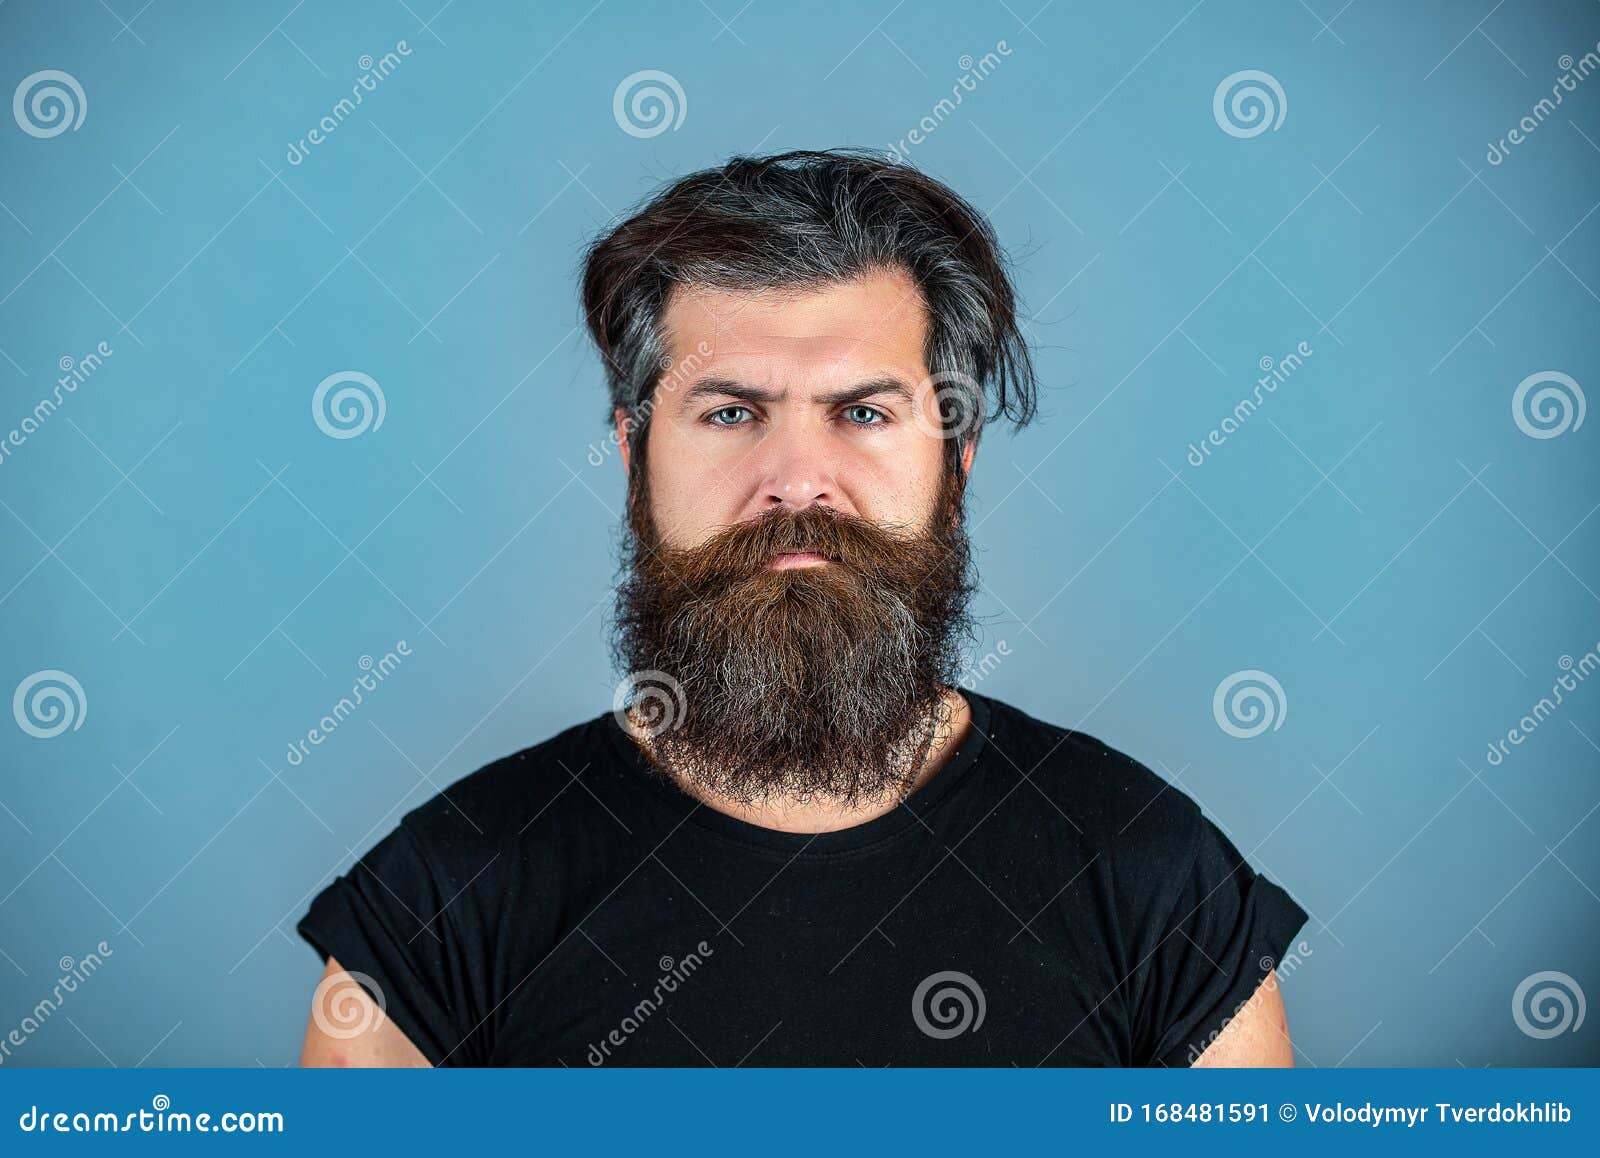 Min Asya dinamik  Long Beard. Perfect Beard. Close-up of Young Bearded Man Standing Against  Blue Background Stock Image - Image of manly, bearded: 168481591